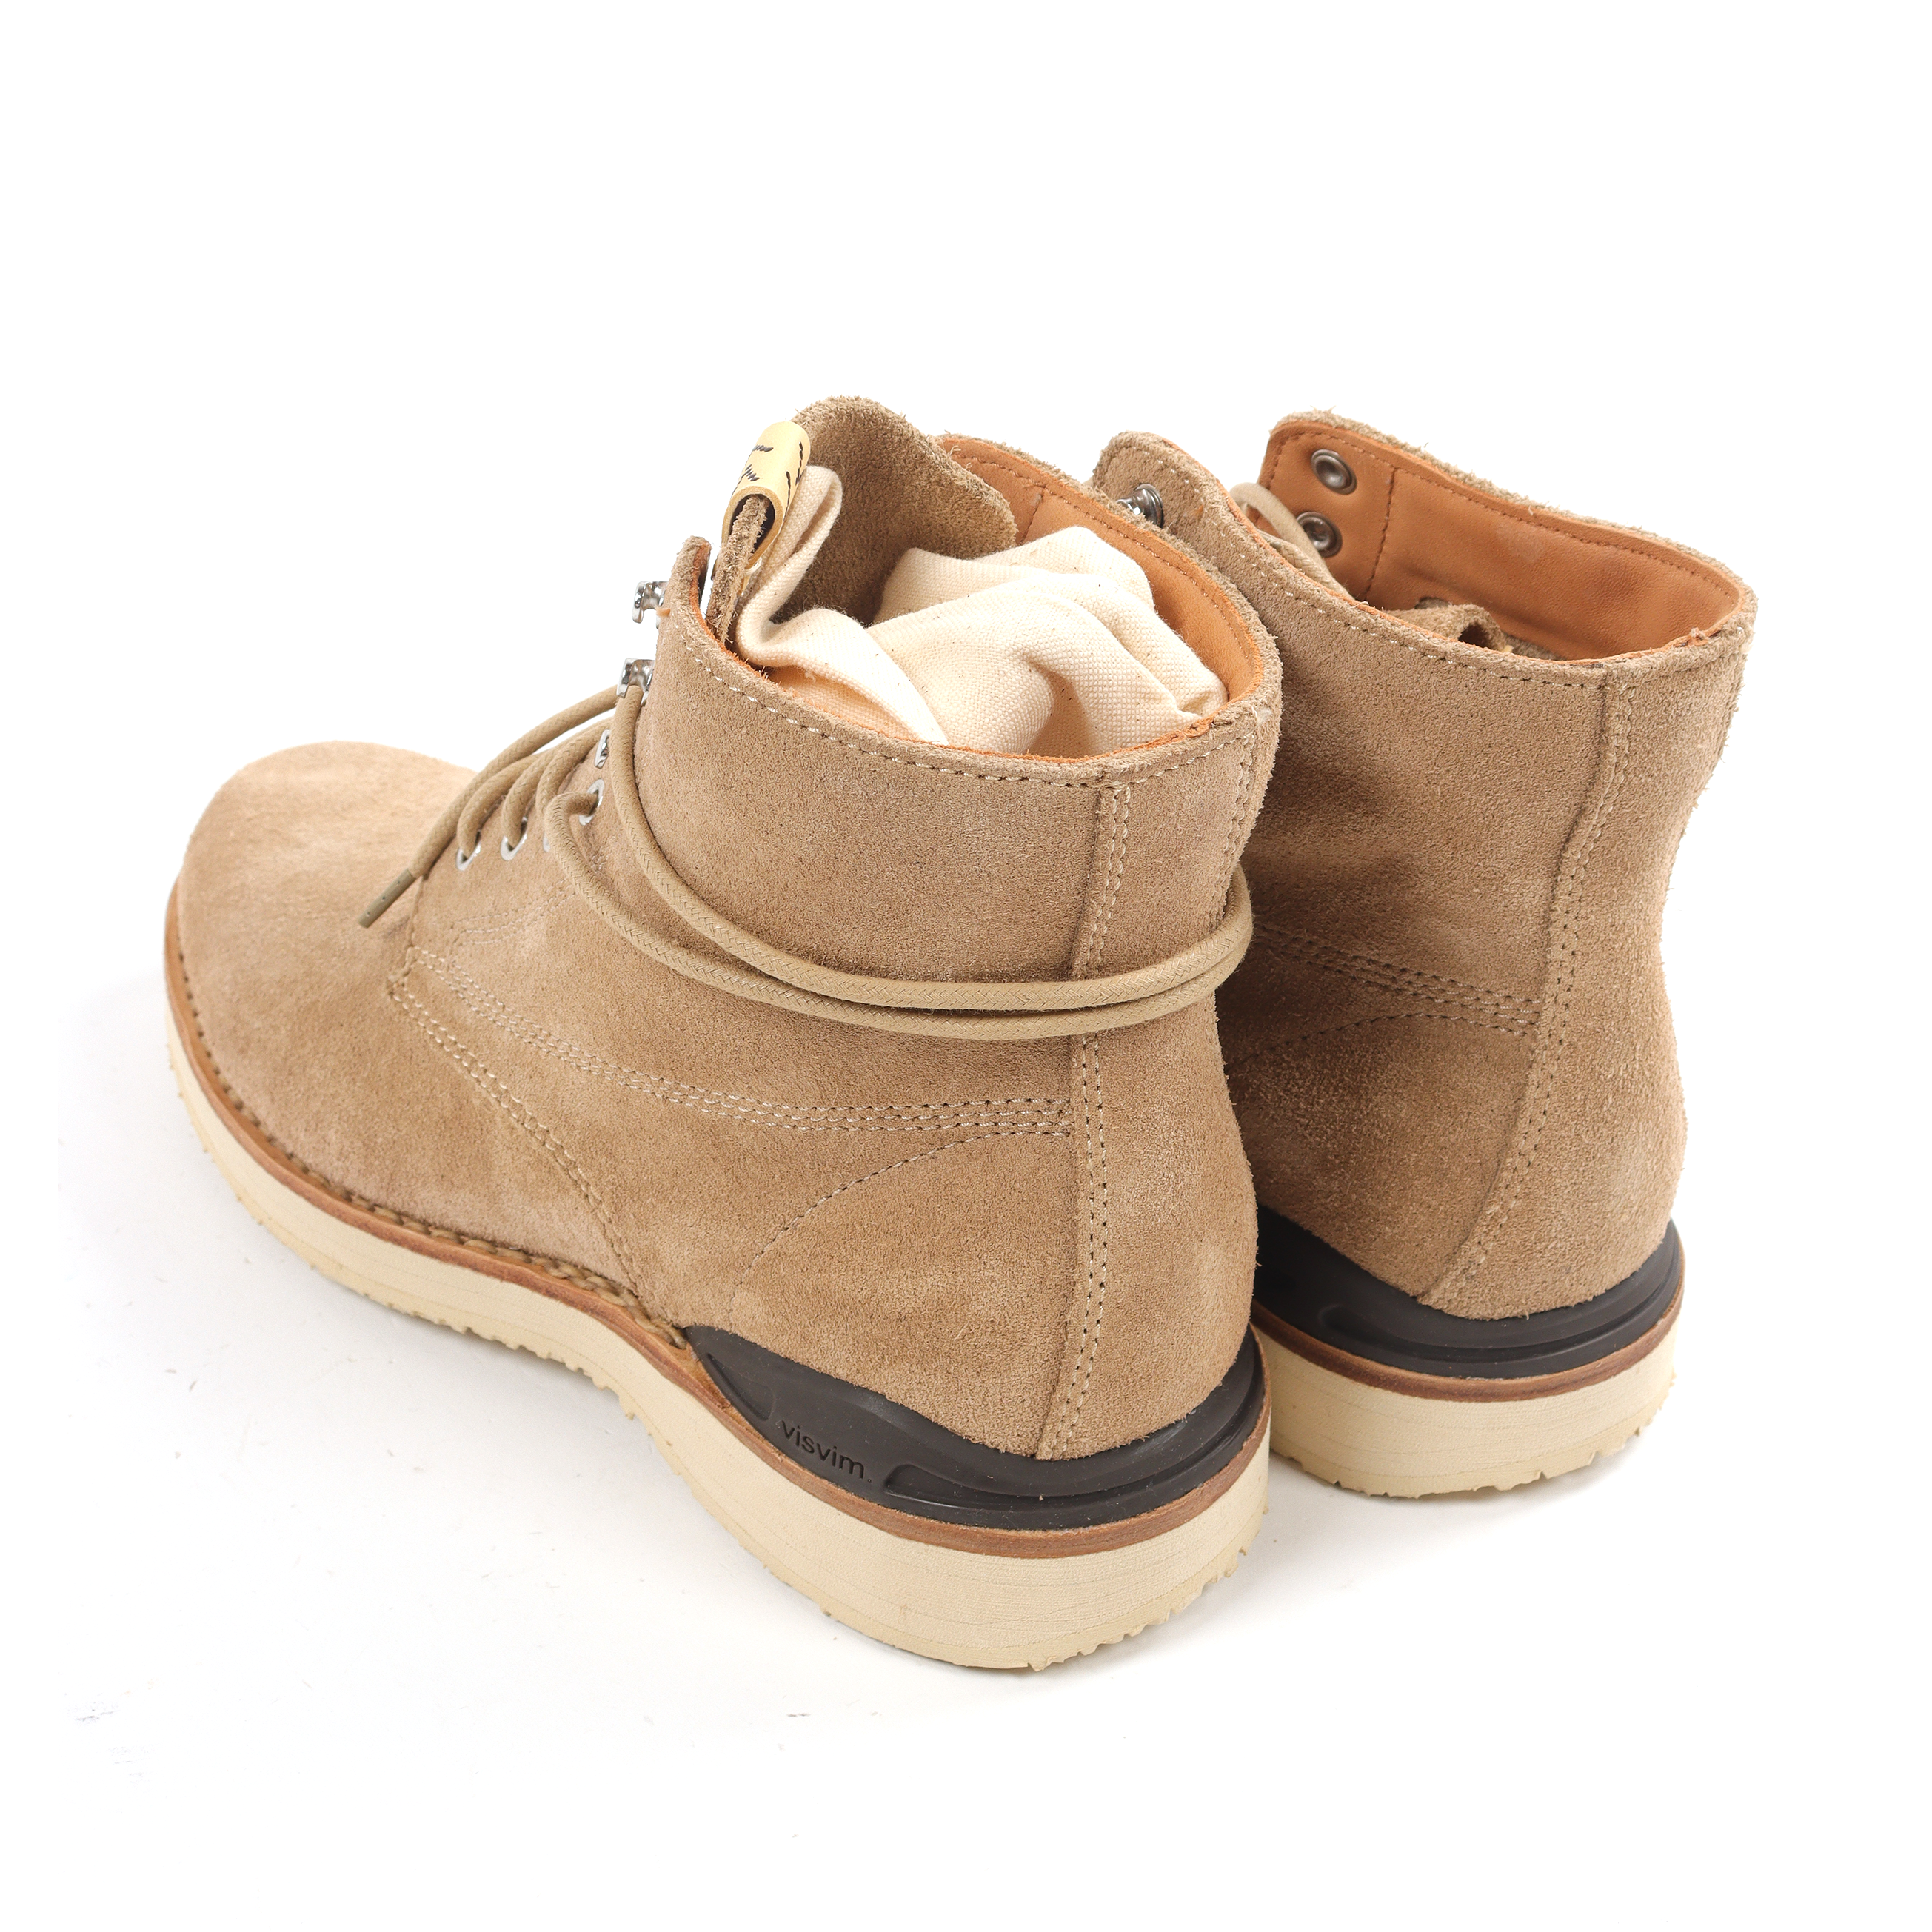 Virgil Suede Boot w/ Tags (Sand)